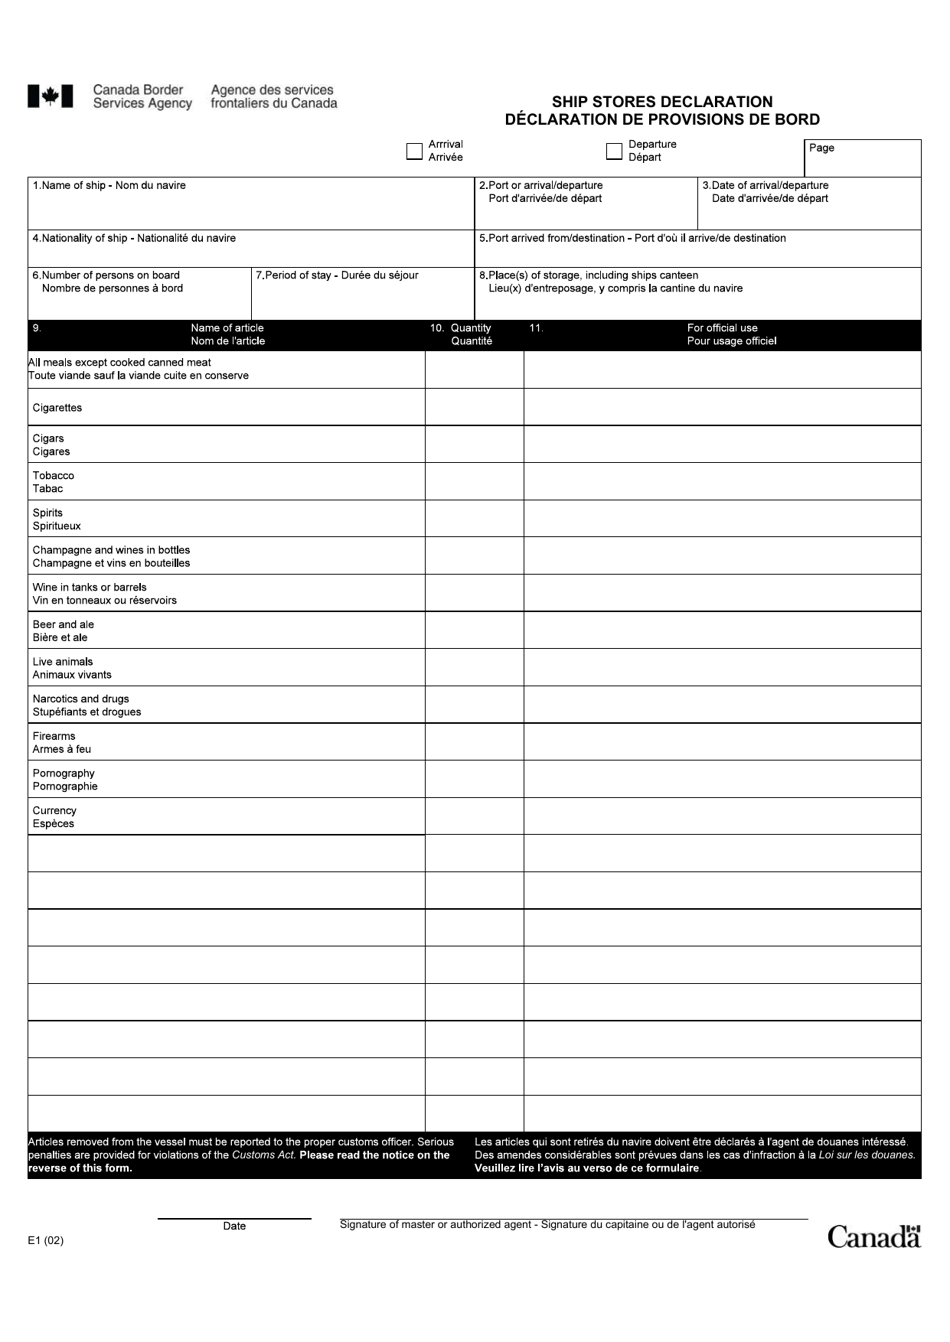 Form E1 Ships Stores Declaration - Canada (English / French), Page 1